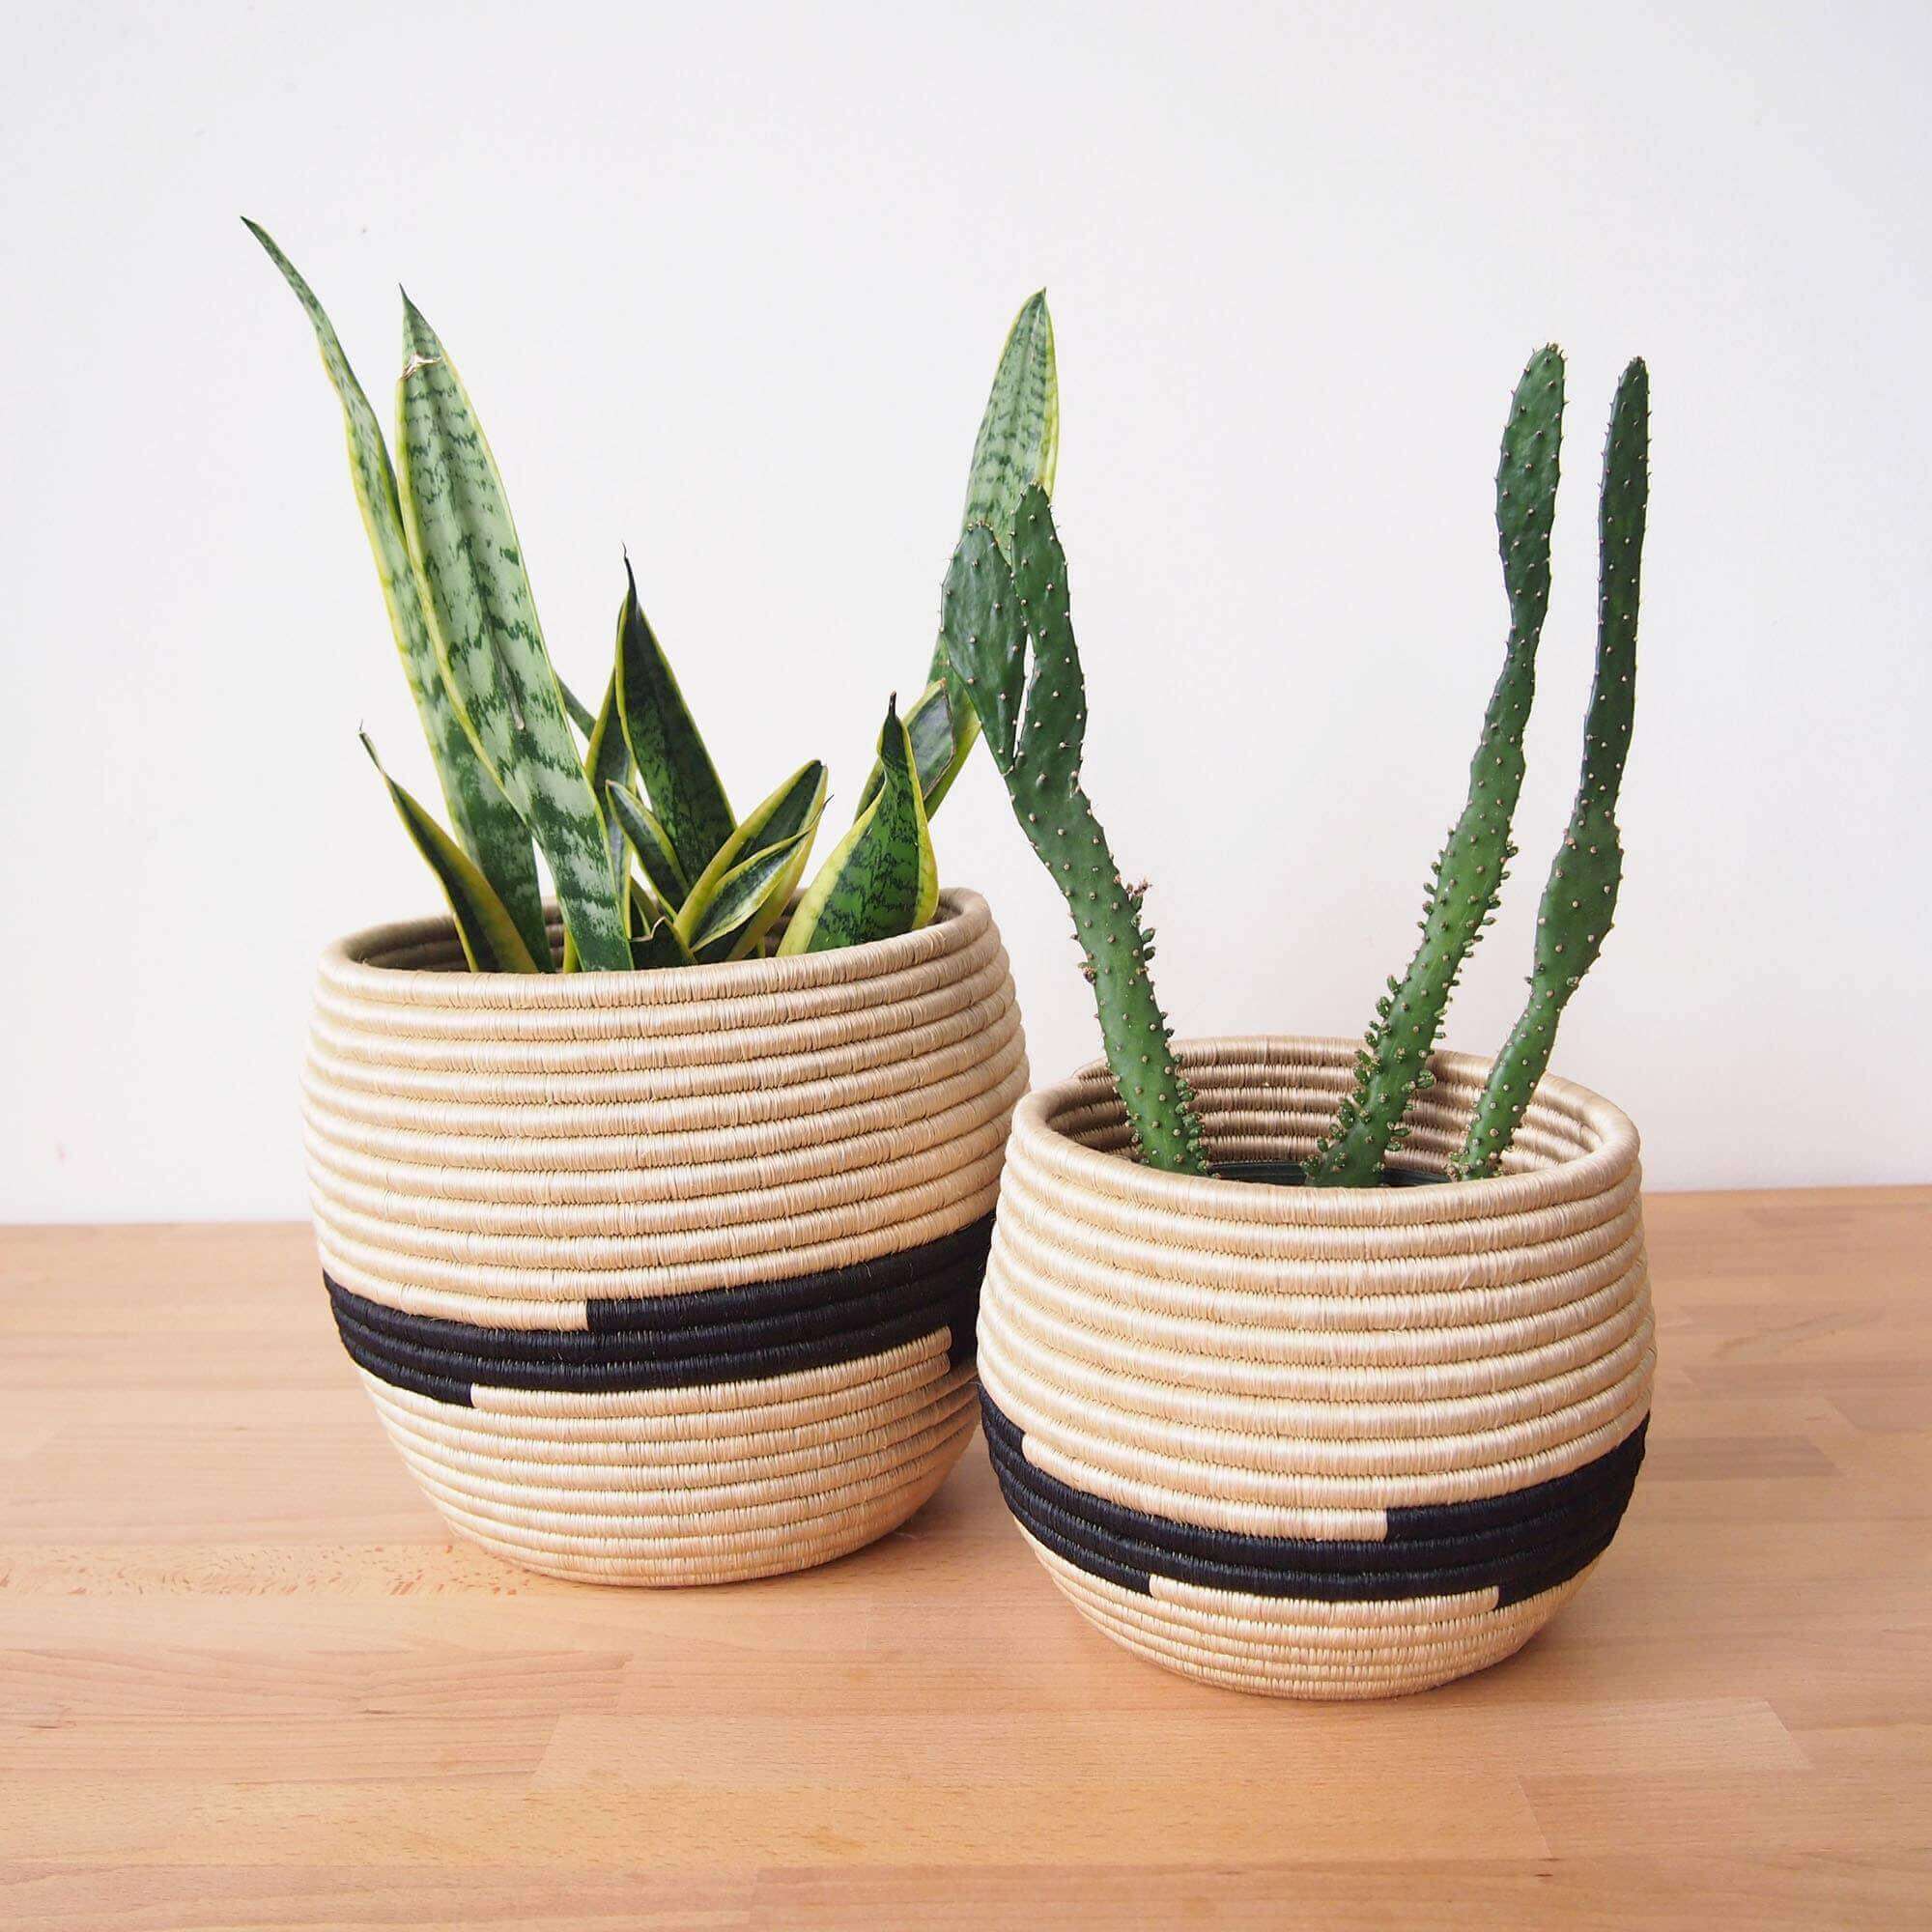 Seagrass plant pots handcrafted by Rwandan artists